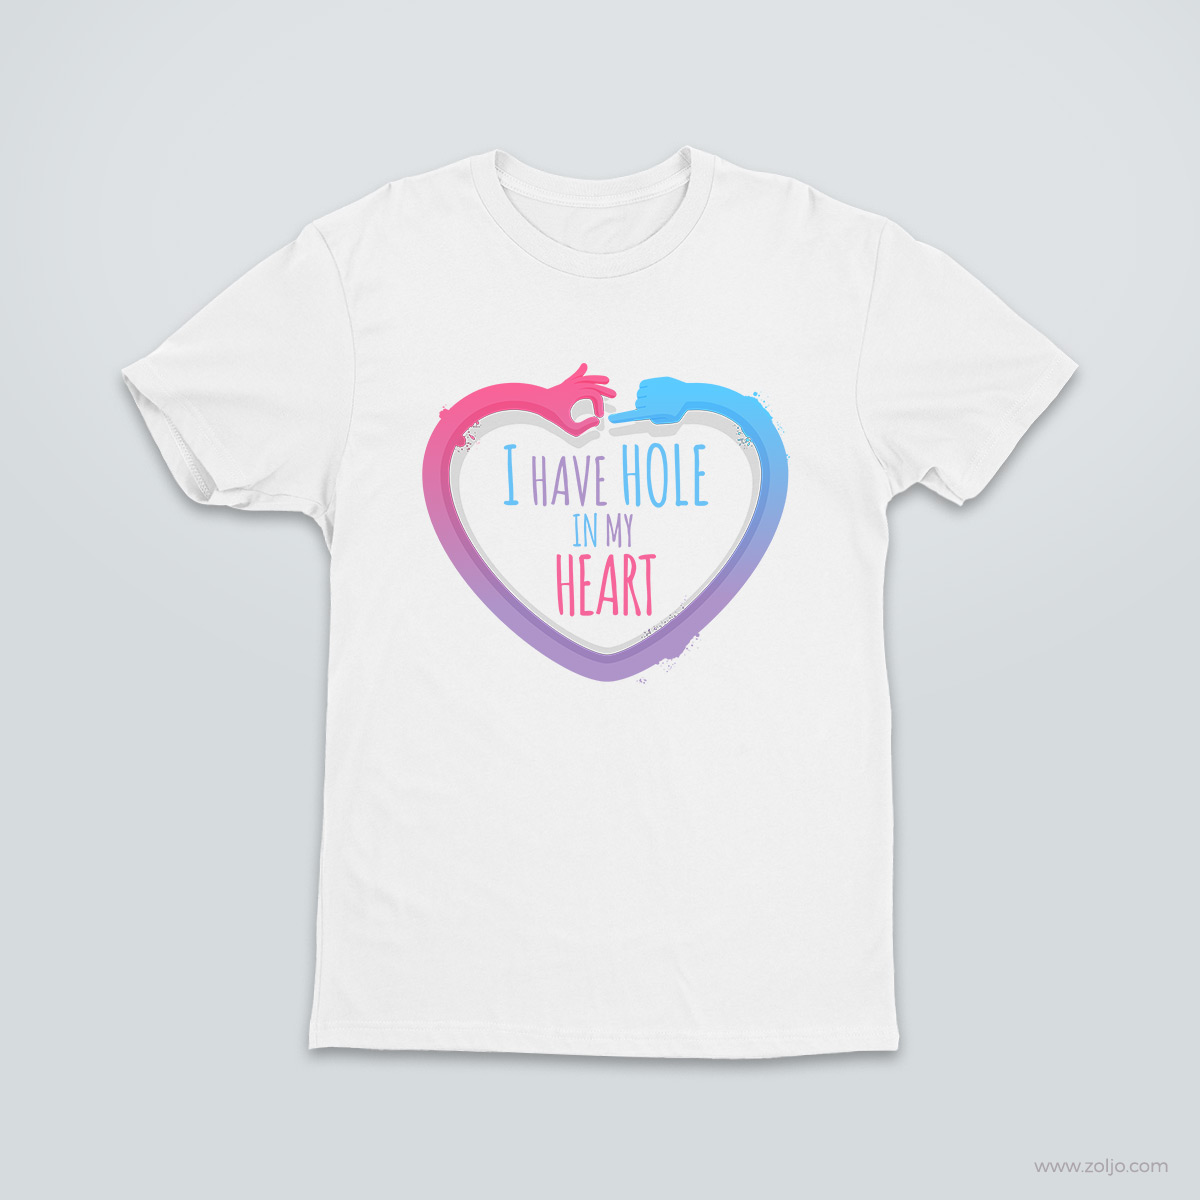 I have hole in my heart T-Shirt